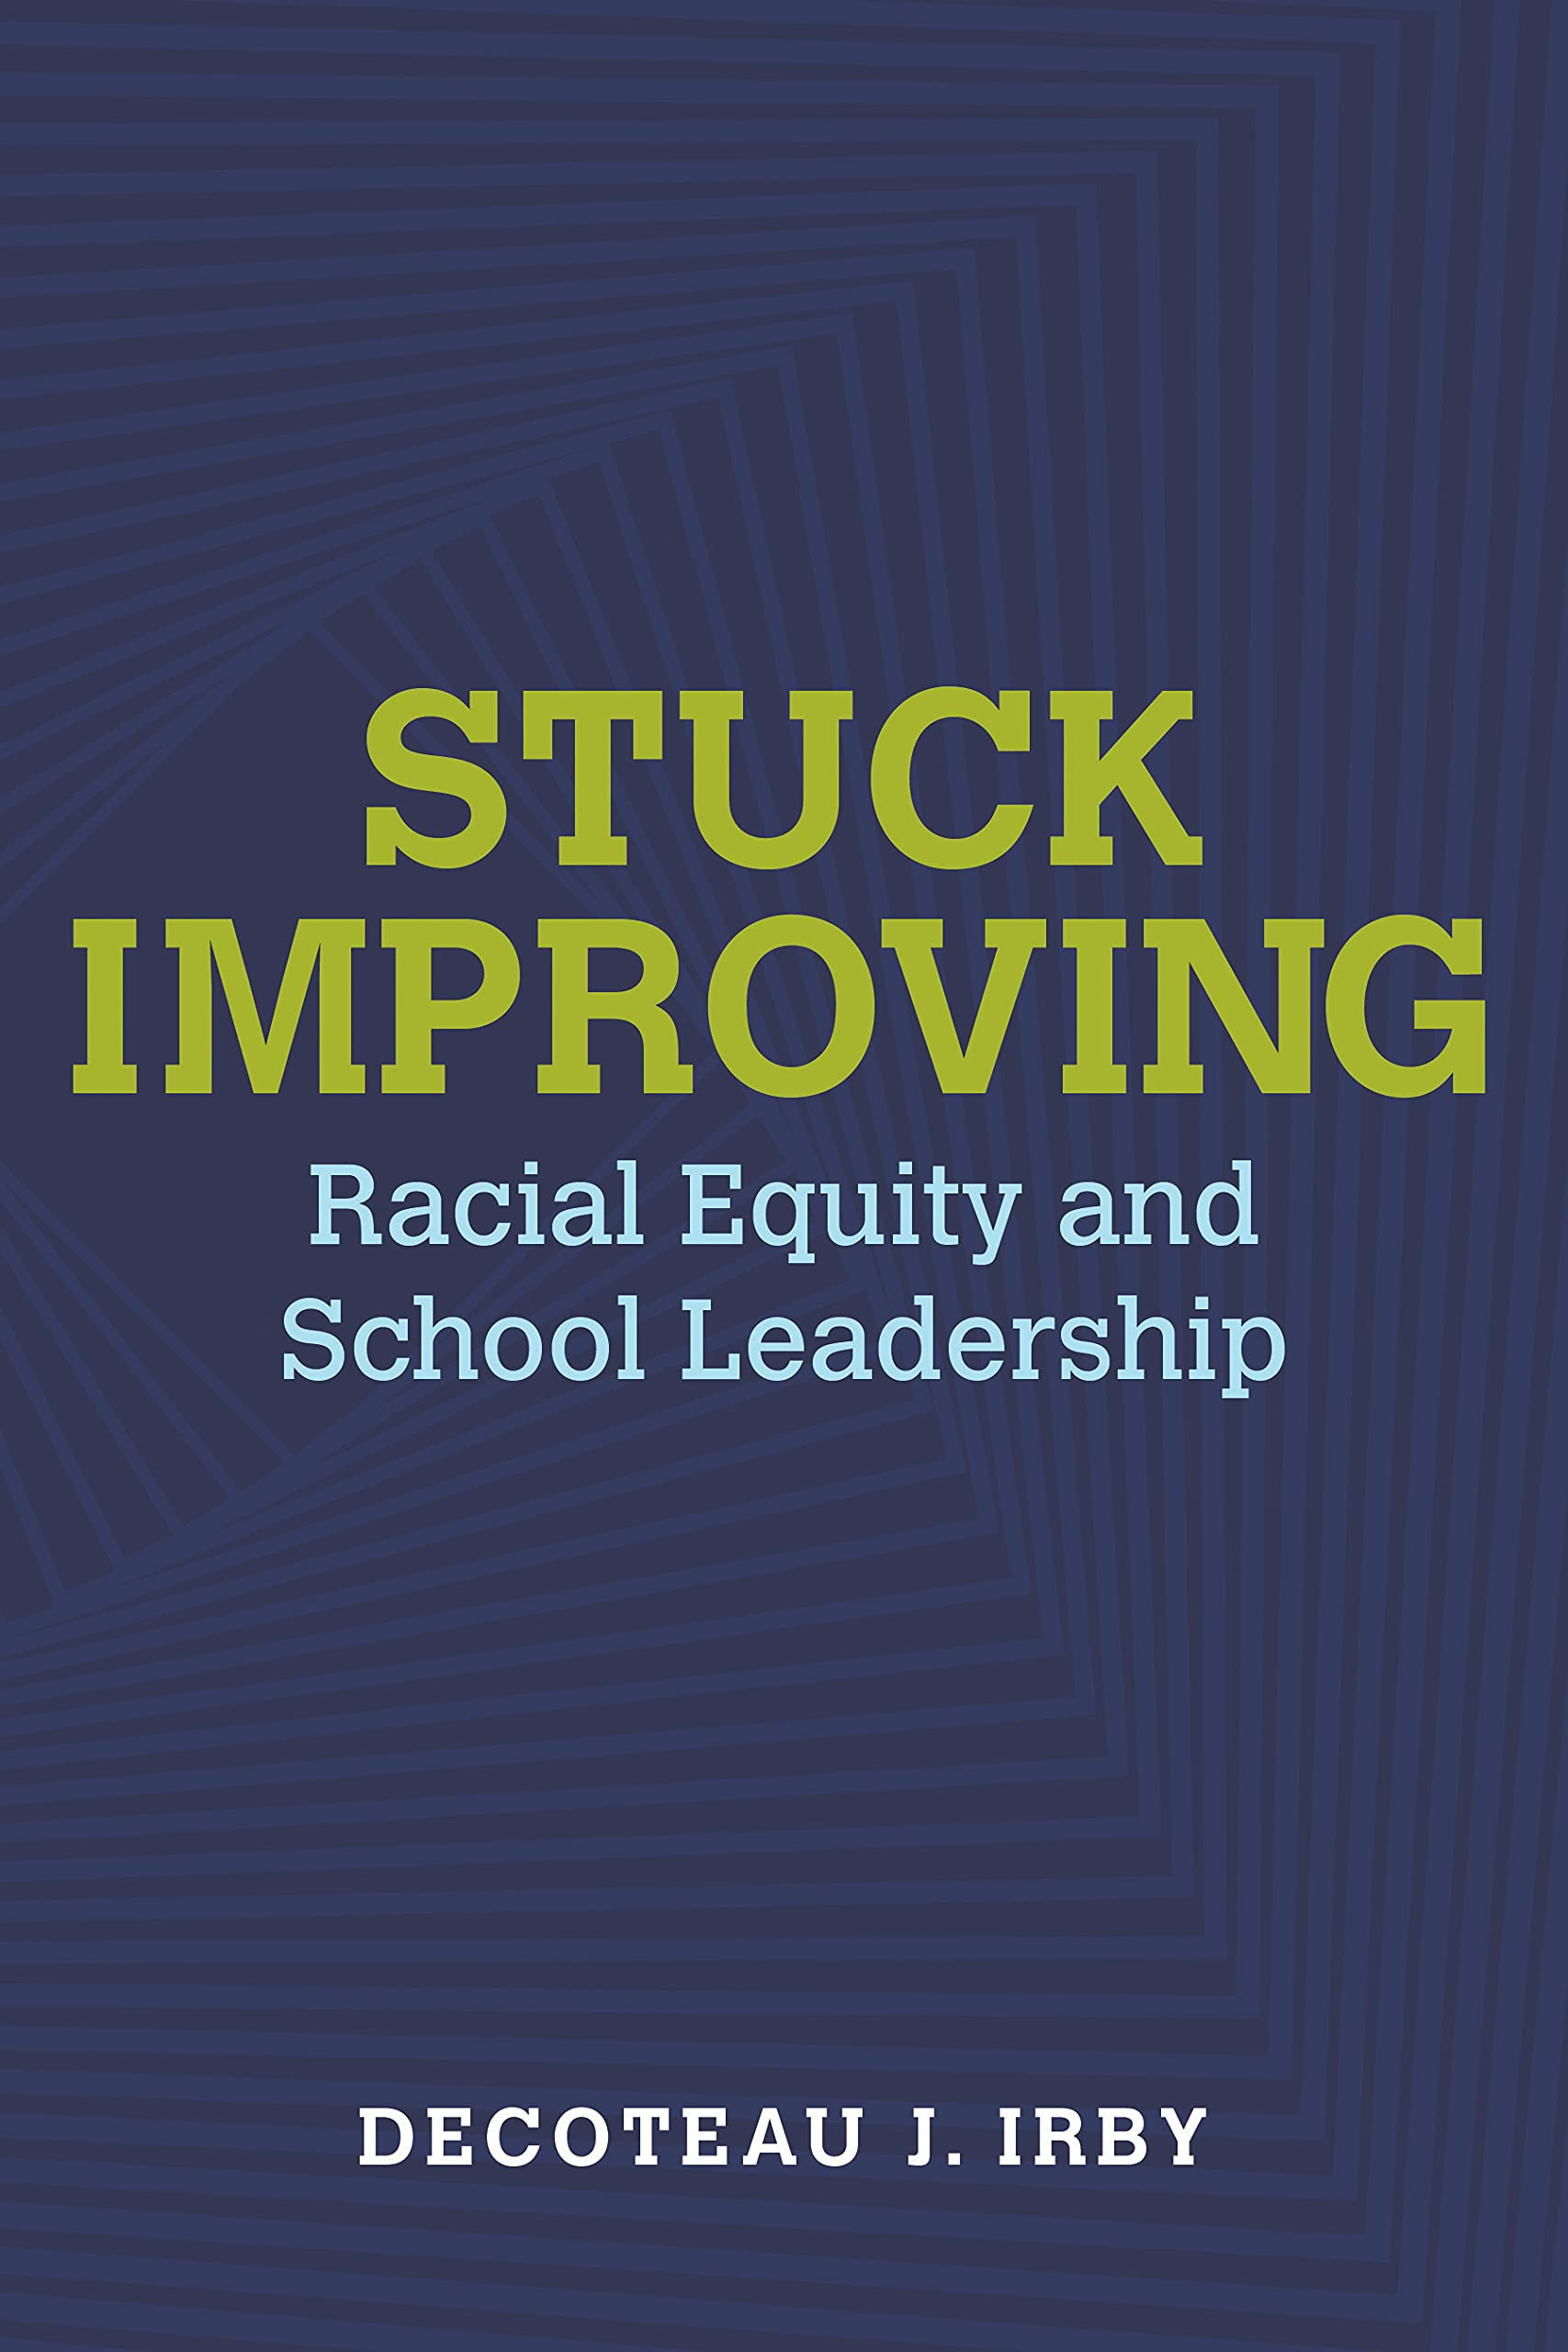 The cover of Stuck Improving